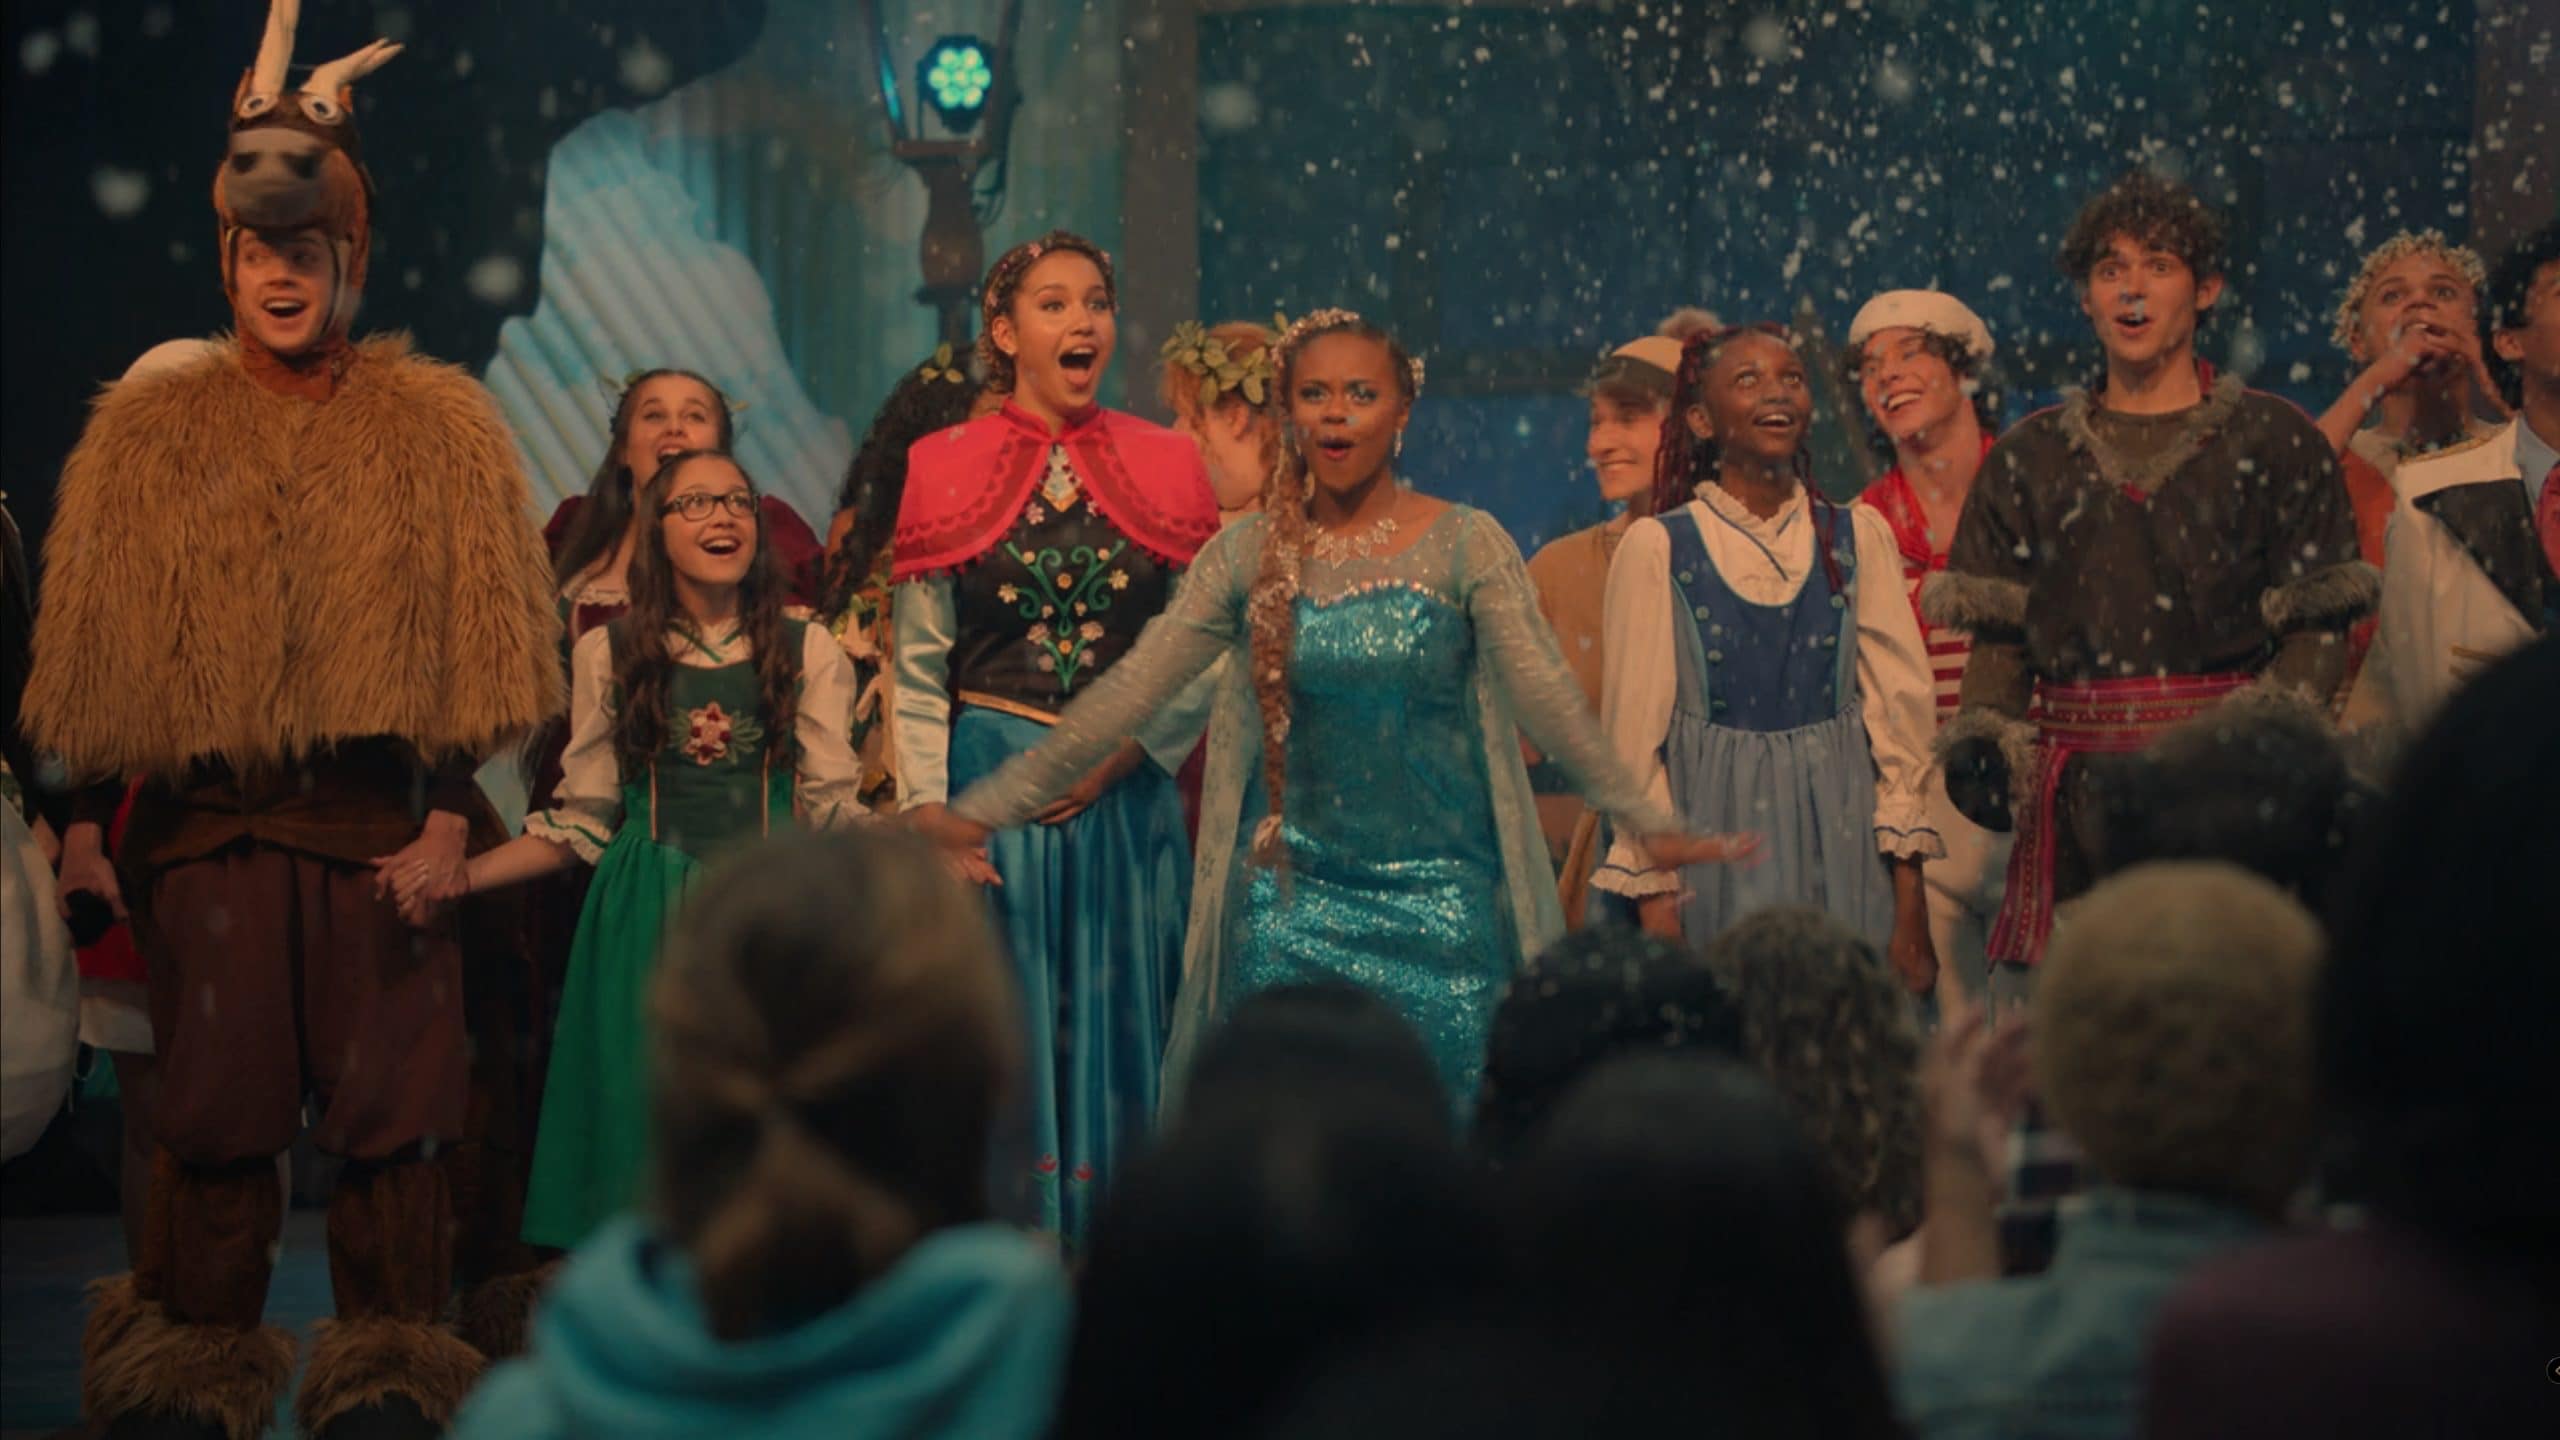 High School Musical: The Musical: The Series: Season 3/ Episode 8 “Let It Go” – Recap/ Review (with Spoilers)